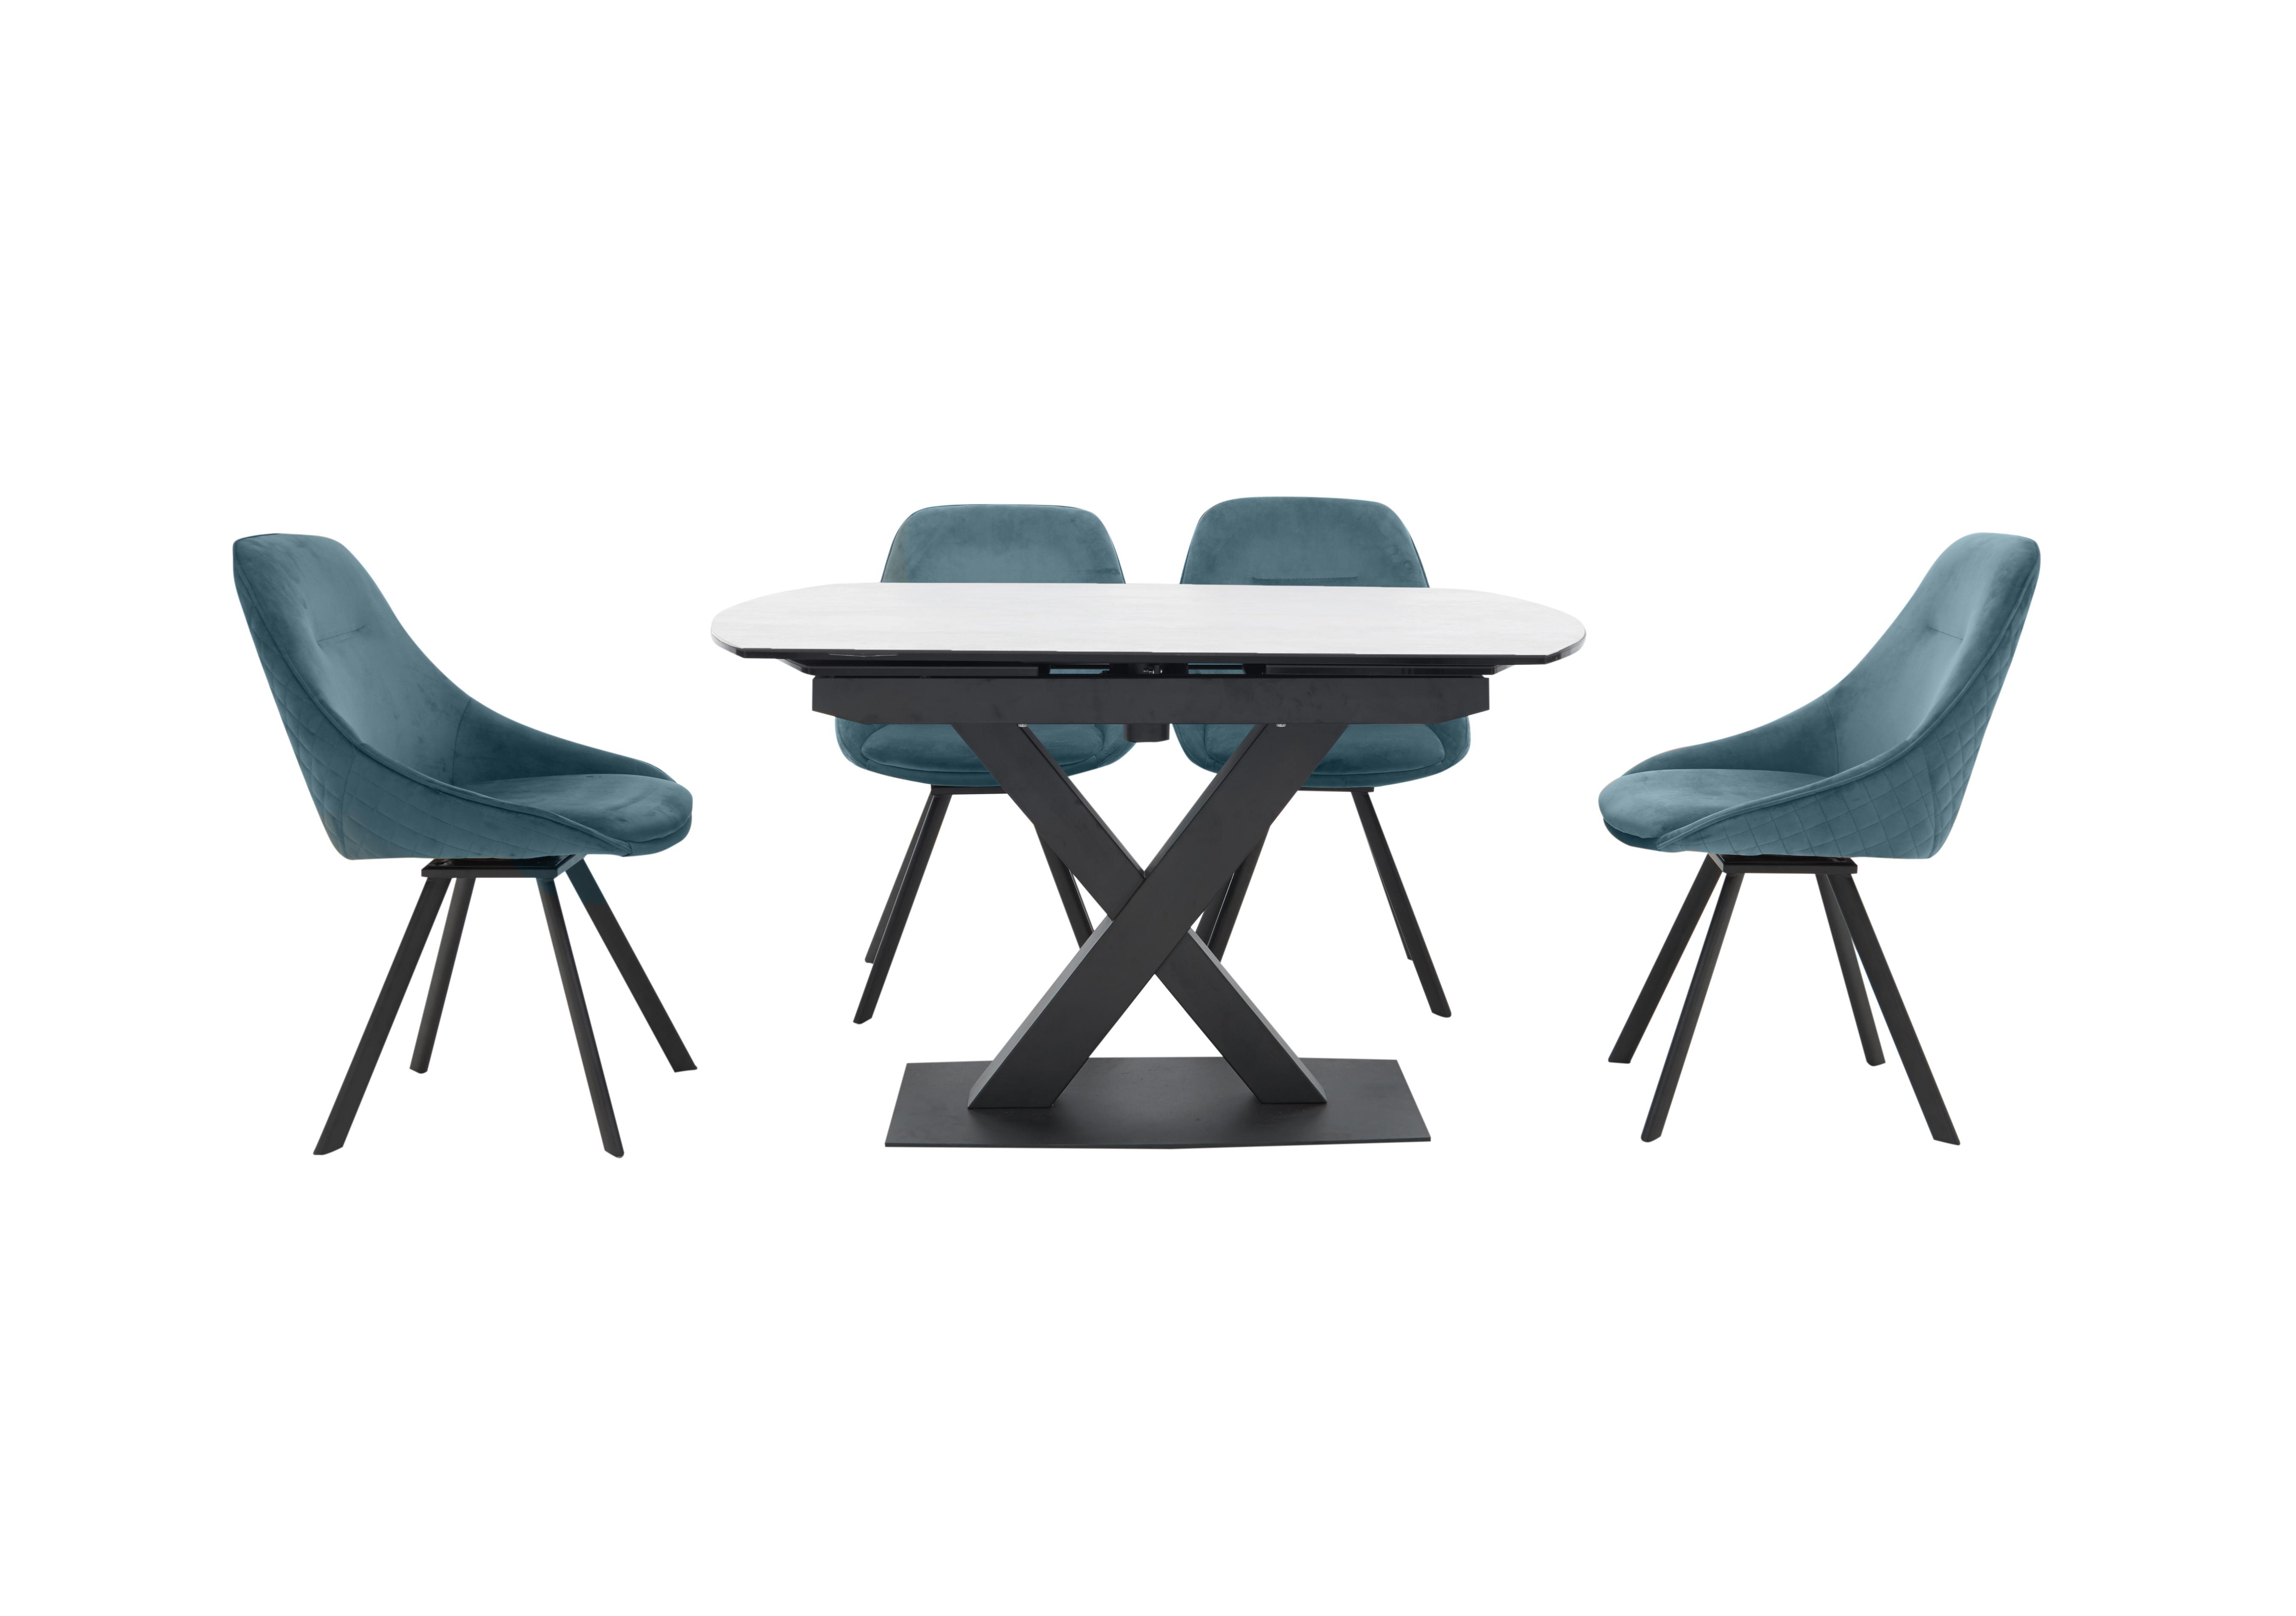 Arctic Extending Dining Table with White Top and 4 Swivel Chairs in Blue Velvet Chairs on Furniture Village